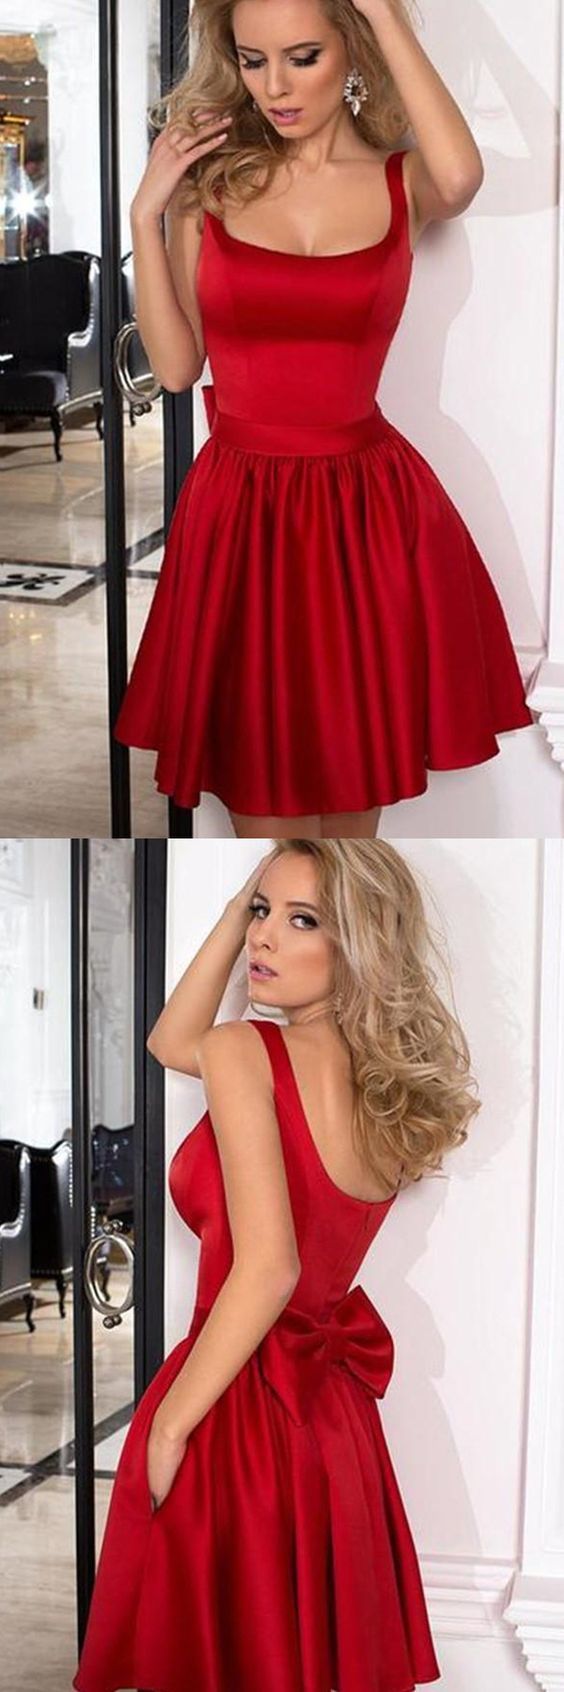 Kaylah A Line Homecoming Dresses Fashion Straps Red Cute 241